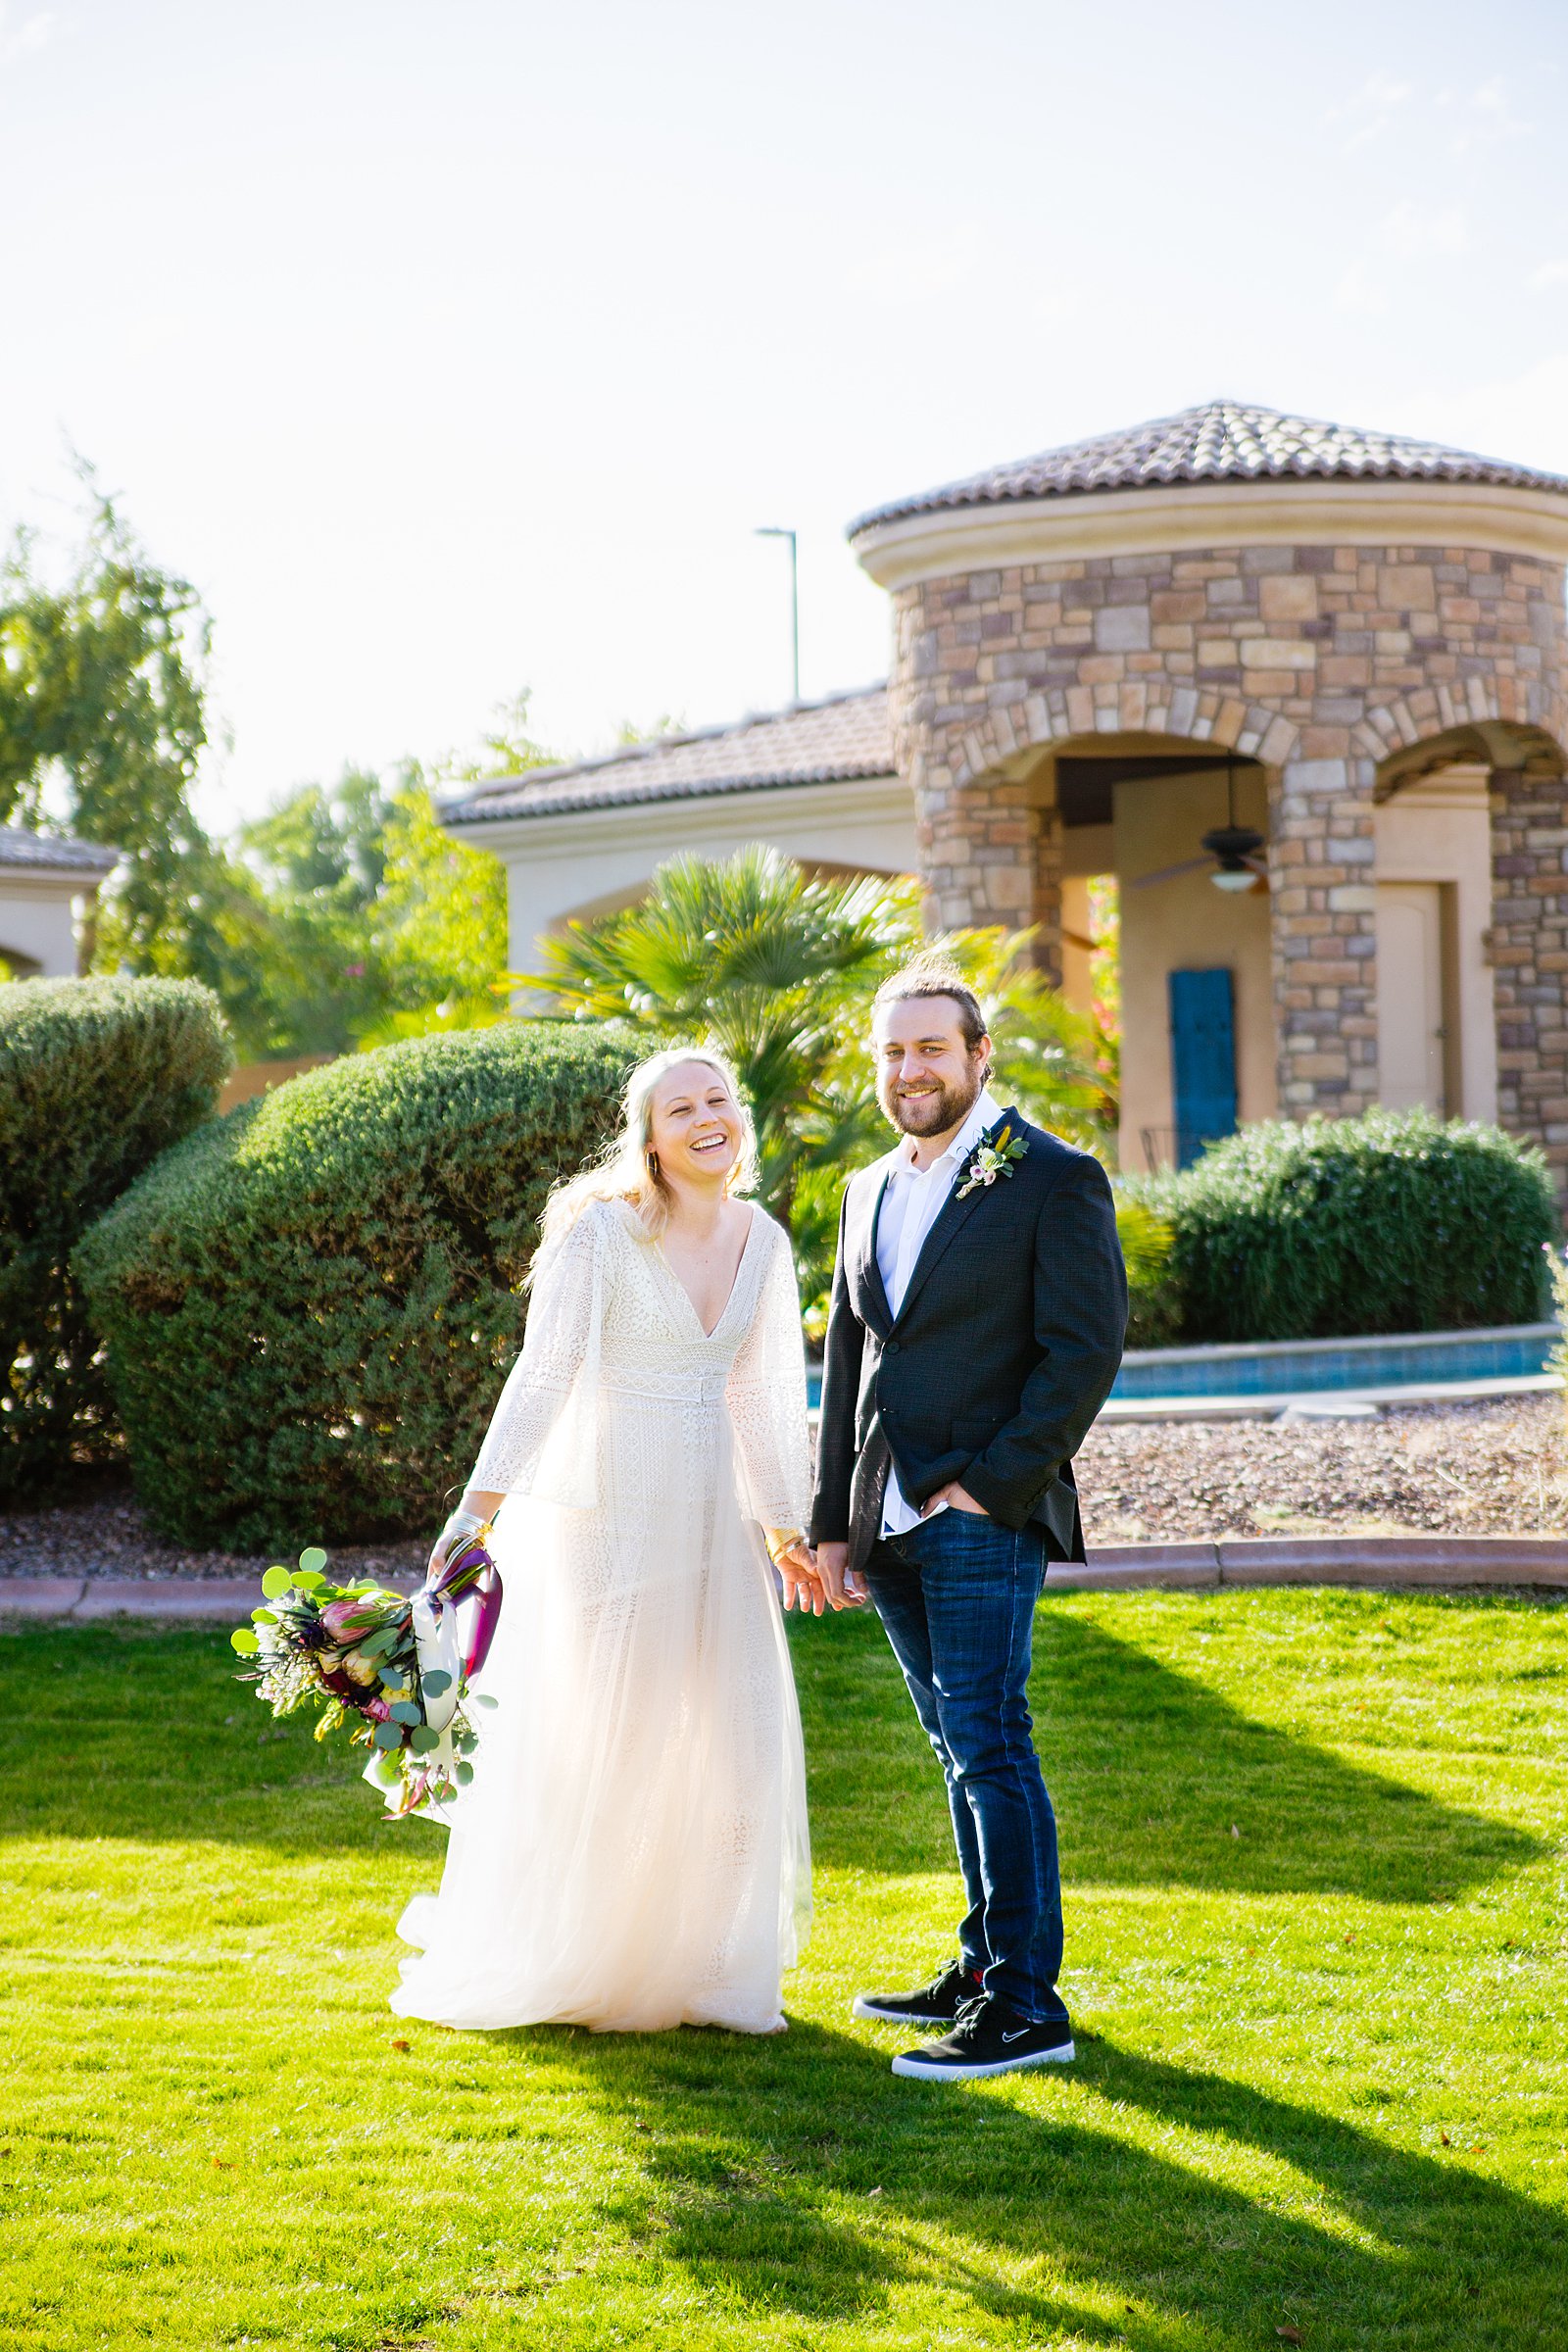 Bride and Groom's first look for their backyard wedding by Phoenix wedding photographer PMA Photography.